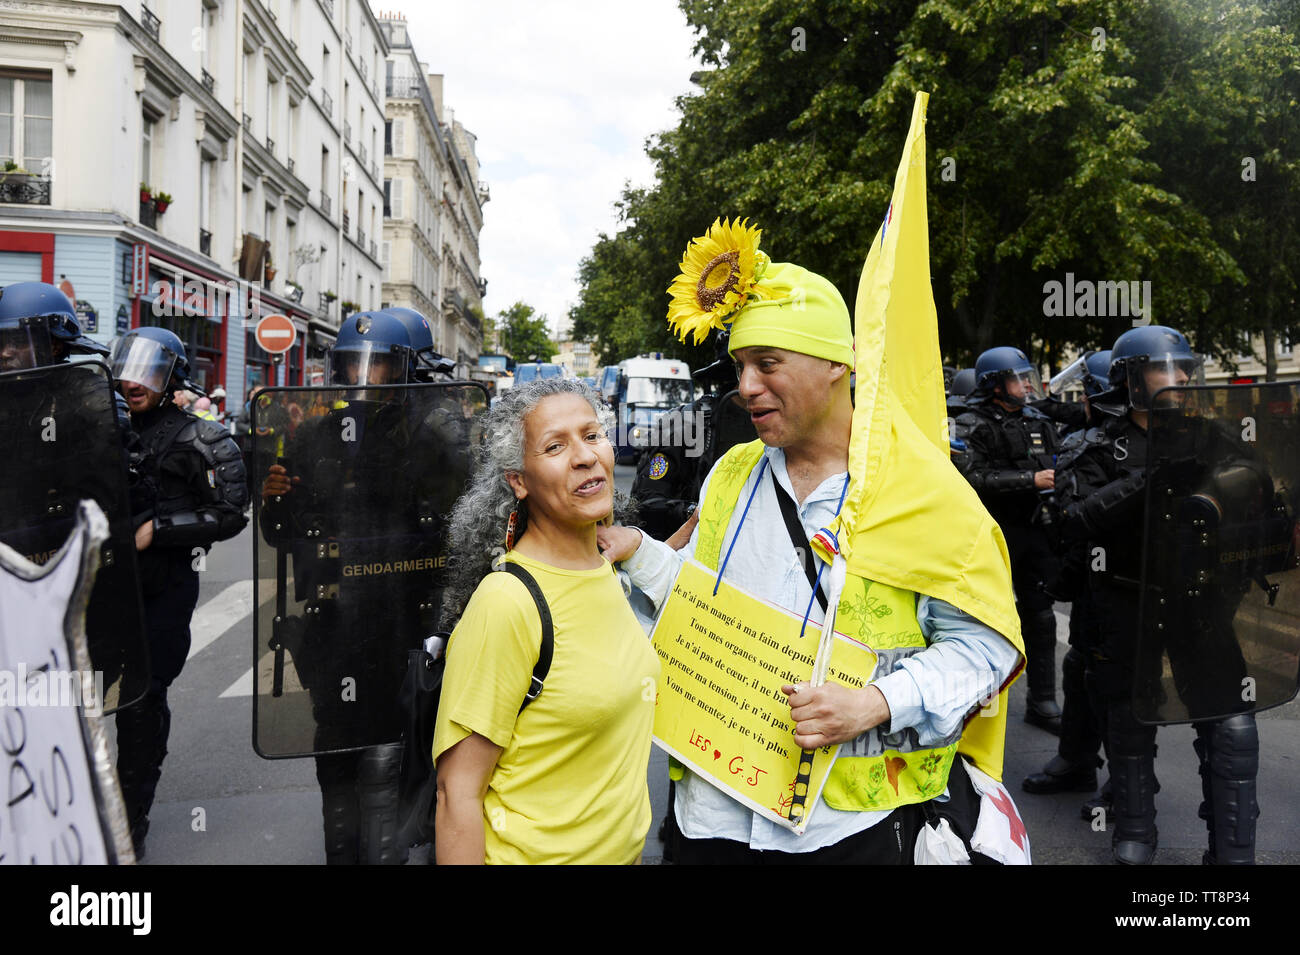 31th saturday of protest for the yellow vests - Paris - France Stock Photo